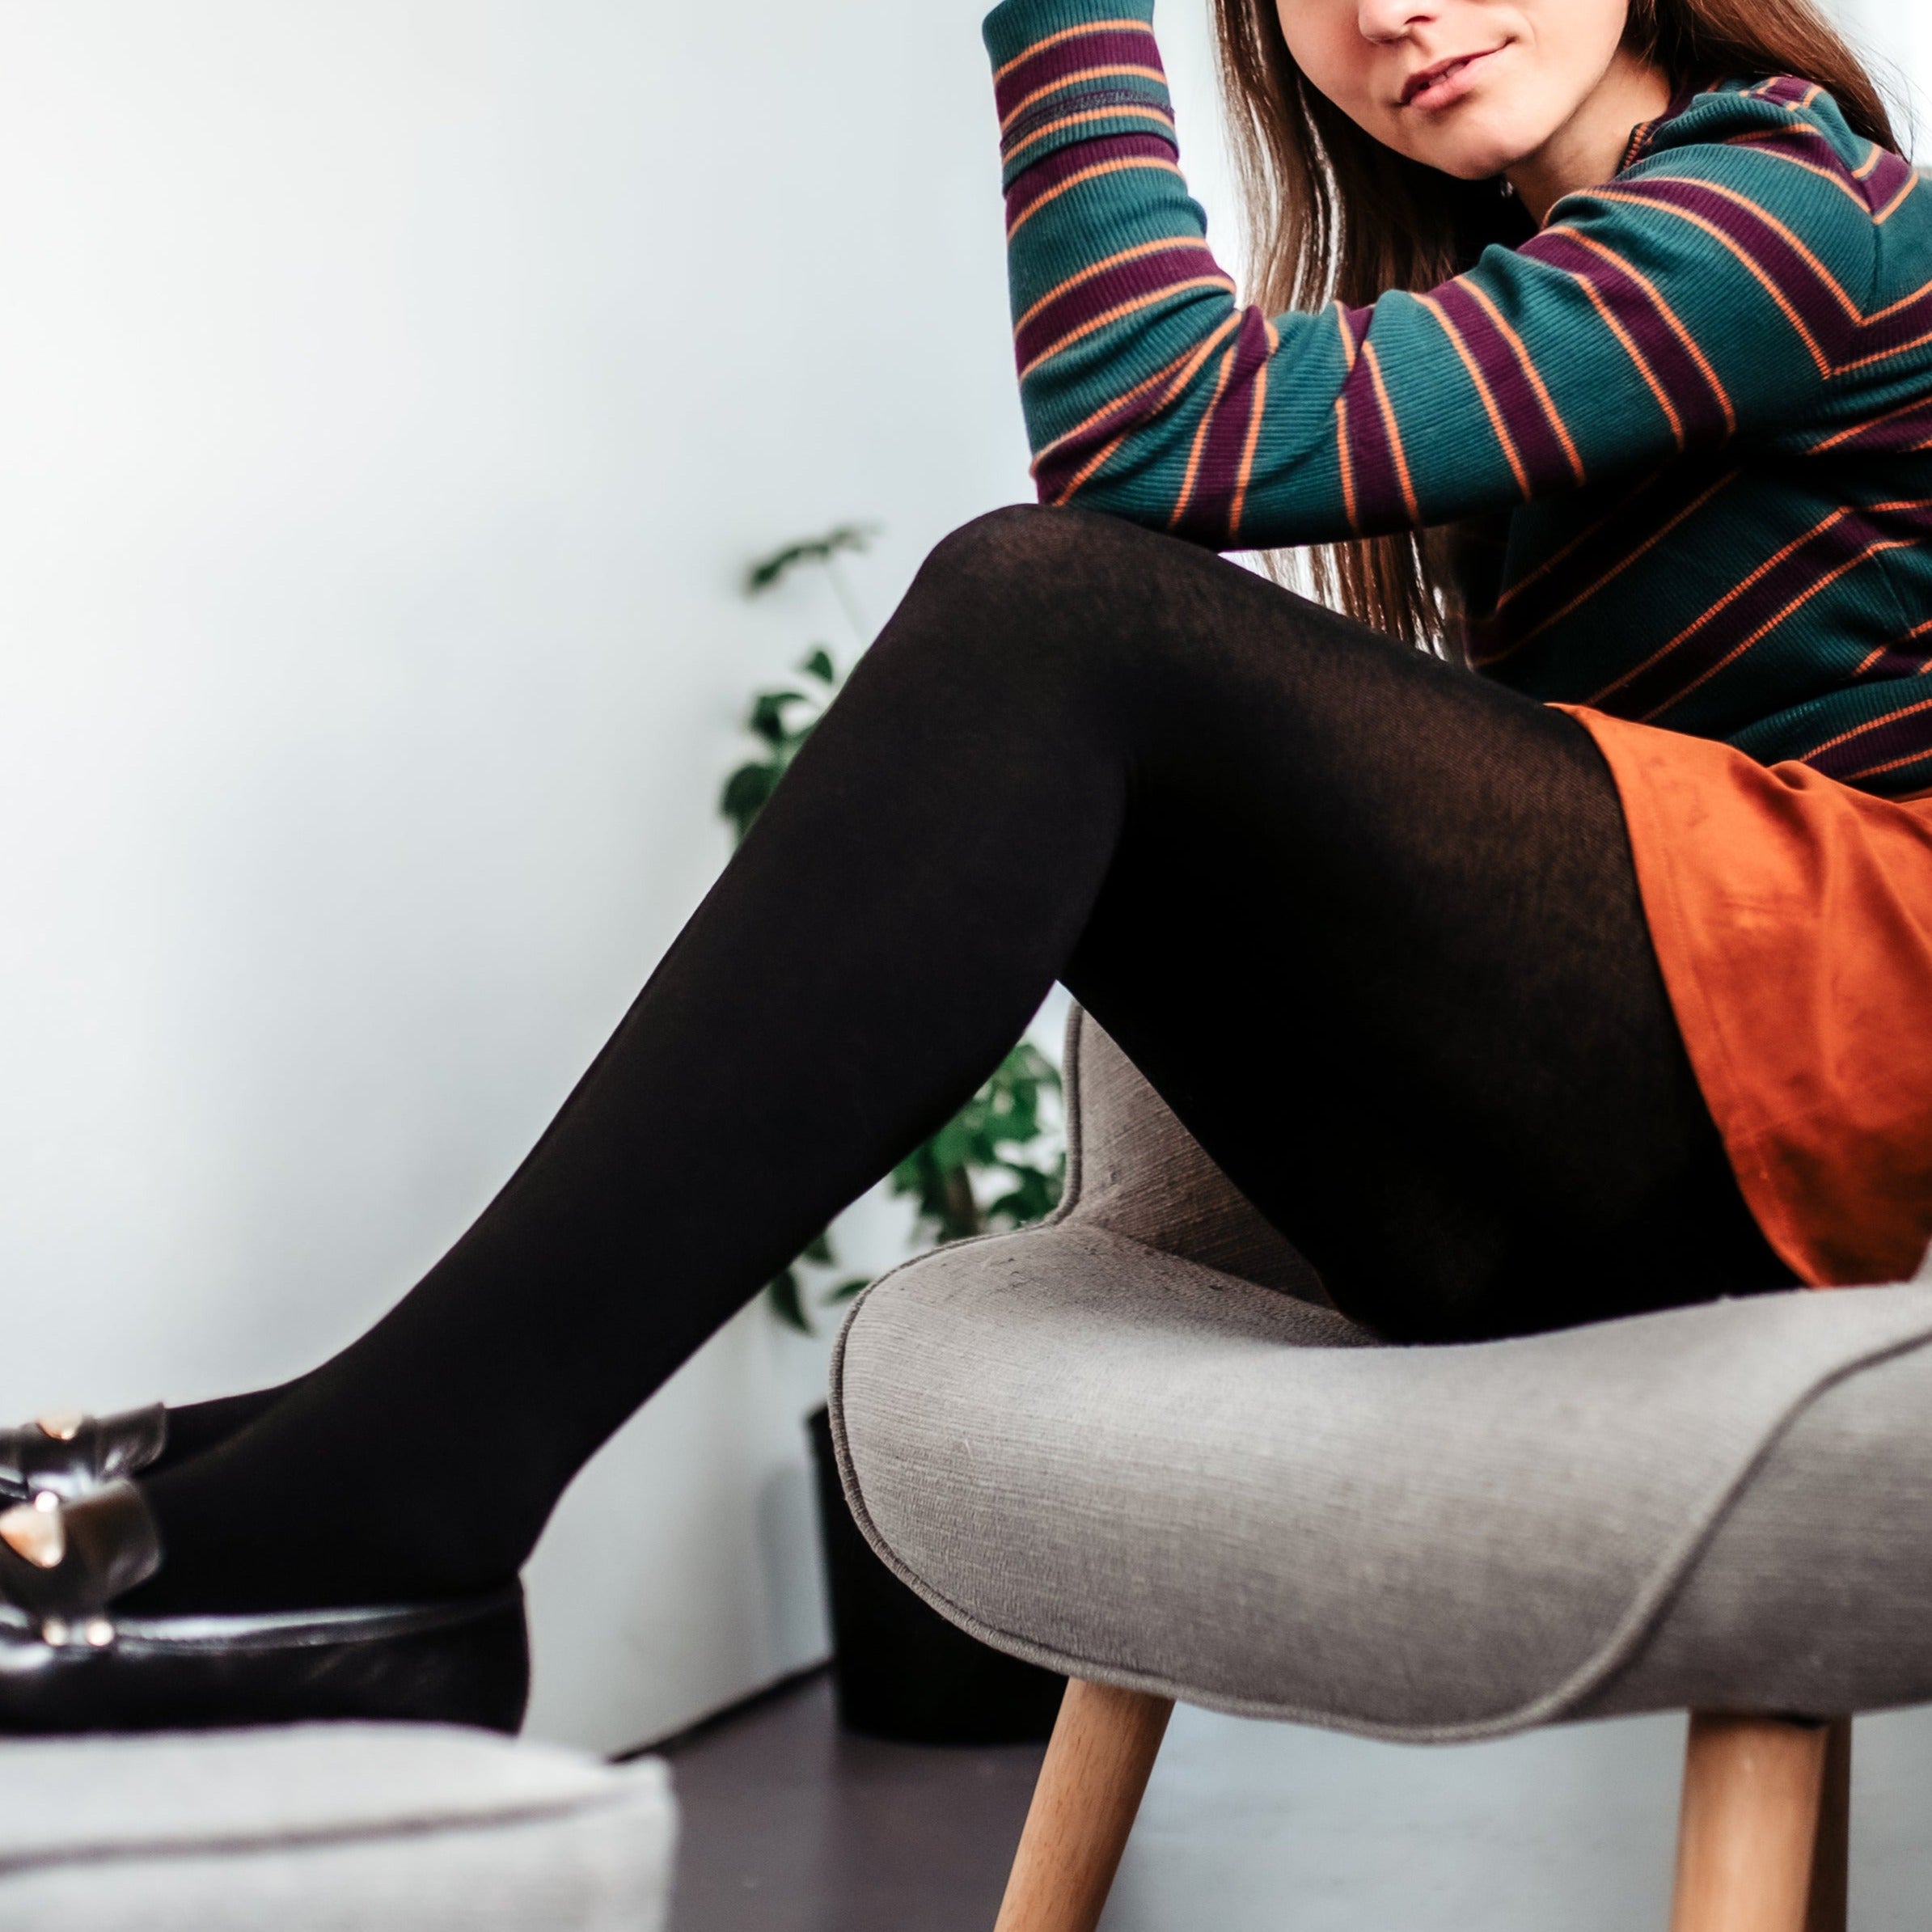 claire benfield recommends Wool Tights With Feet